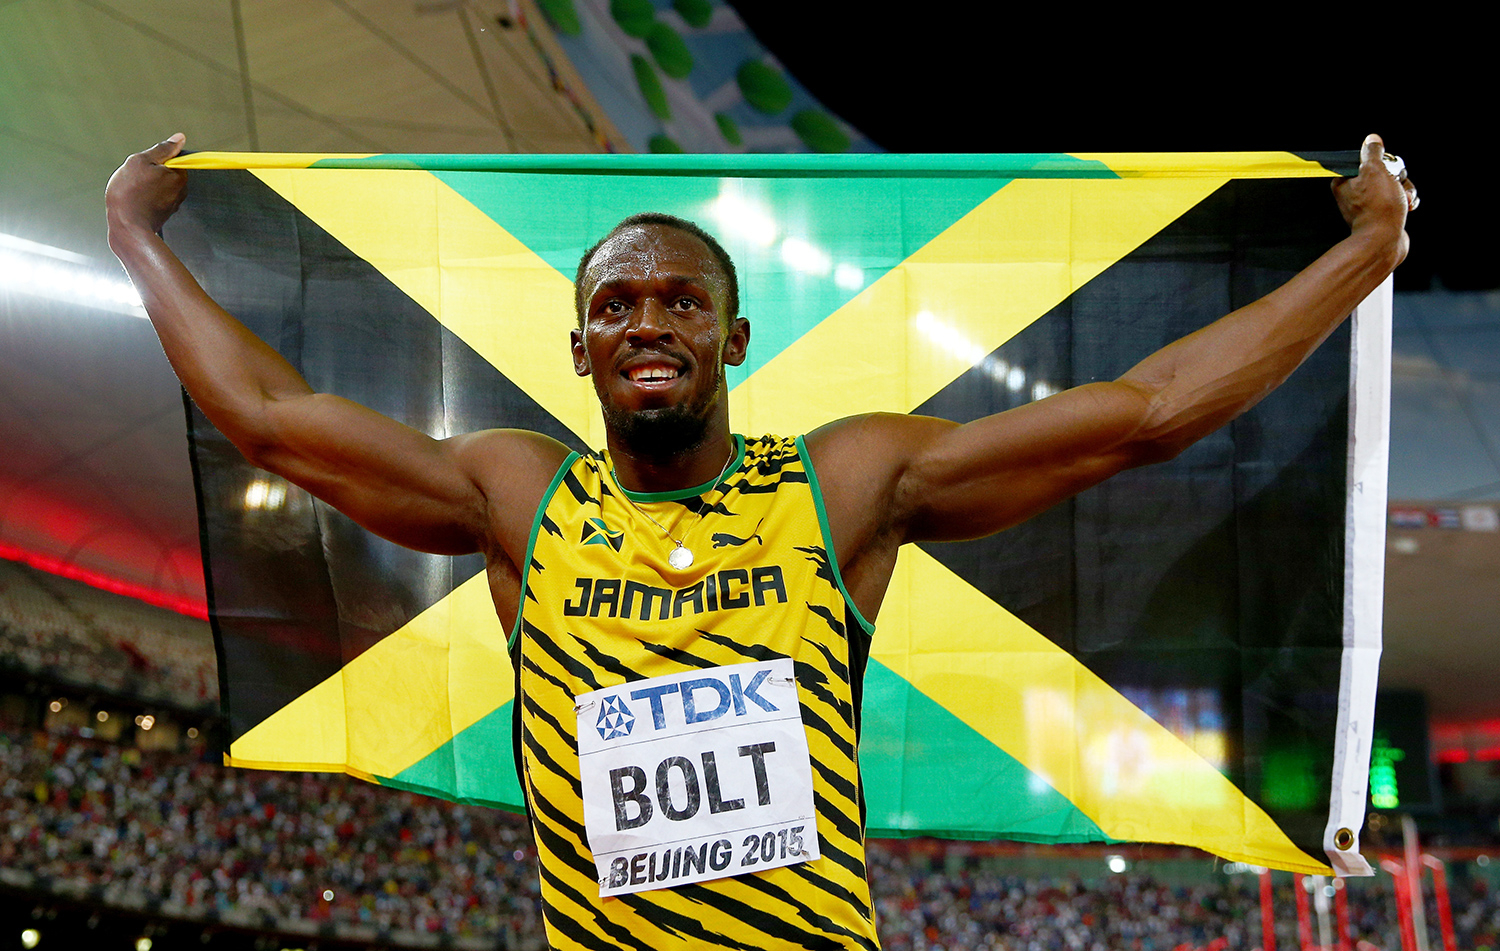 What Religion Is Usain Bolt